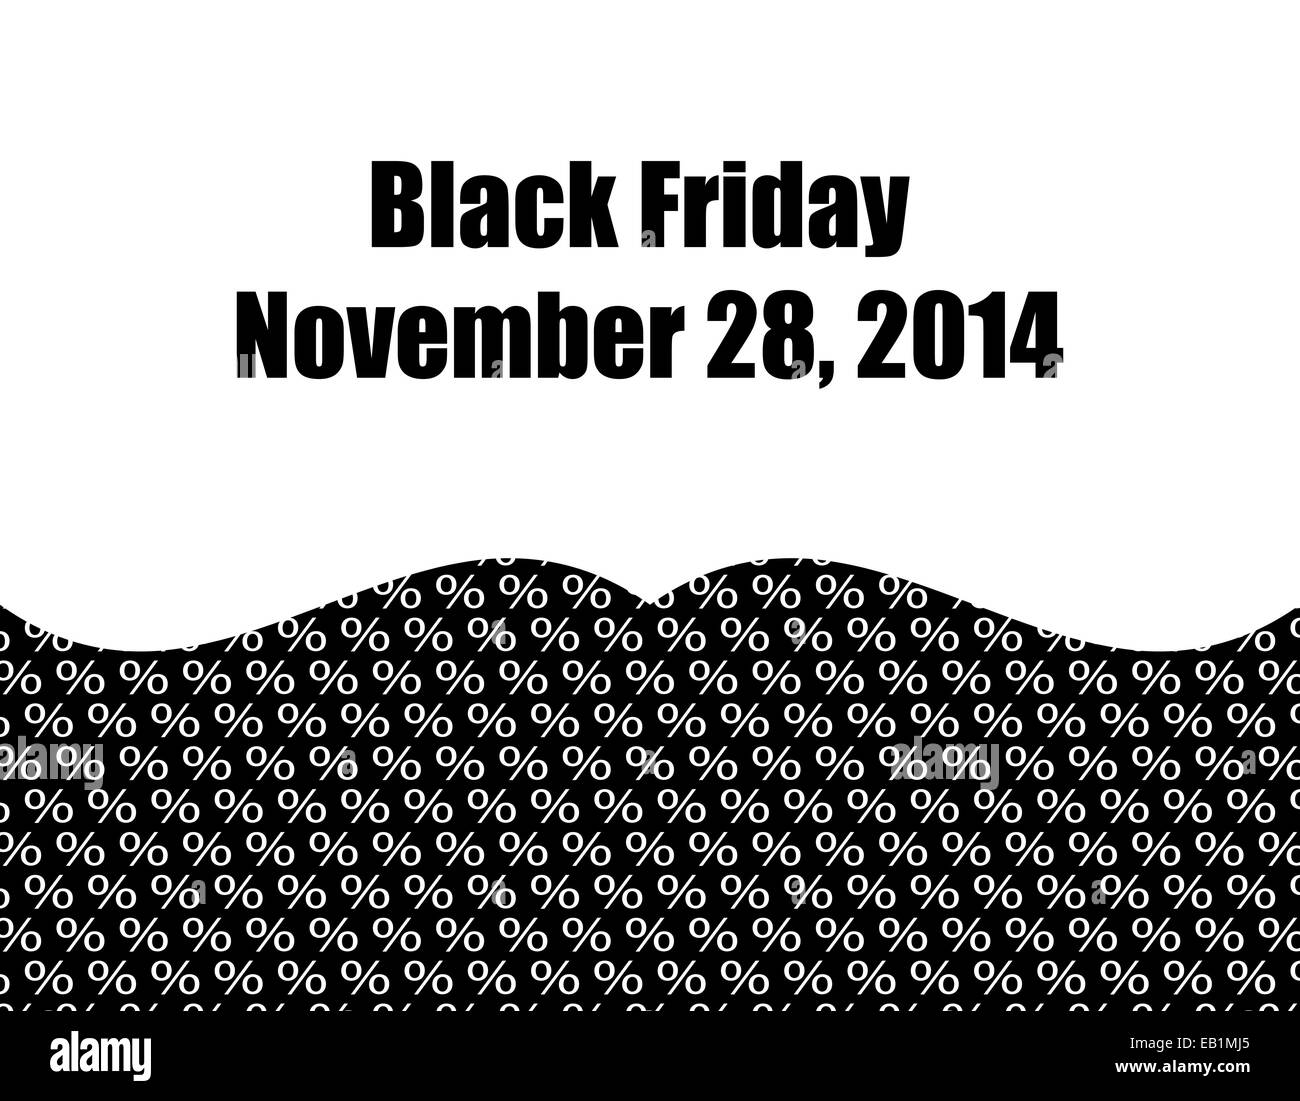 special black friday 2014 background Stock Photo